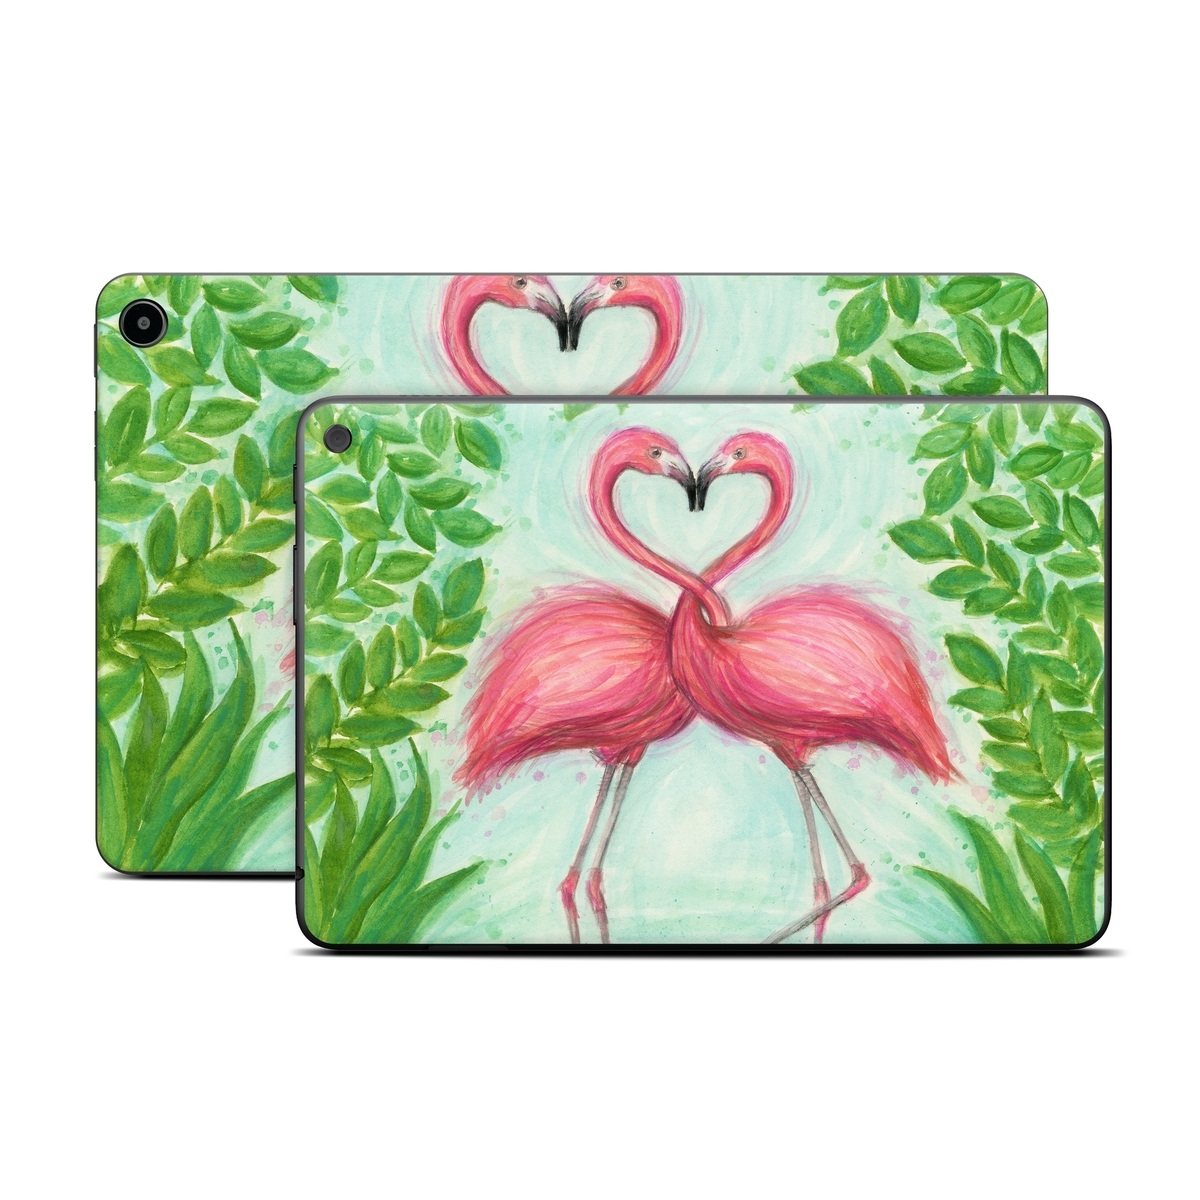 Amazon Fire Tablet Series Skin Skin design of Flamingo, Greater flamingo, Bird, Water bird, Pink, Illustration, Watercolor paint, Organism, Drawing, Stork, with pink, blue, green colors